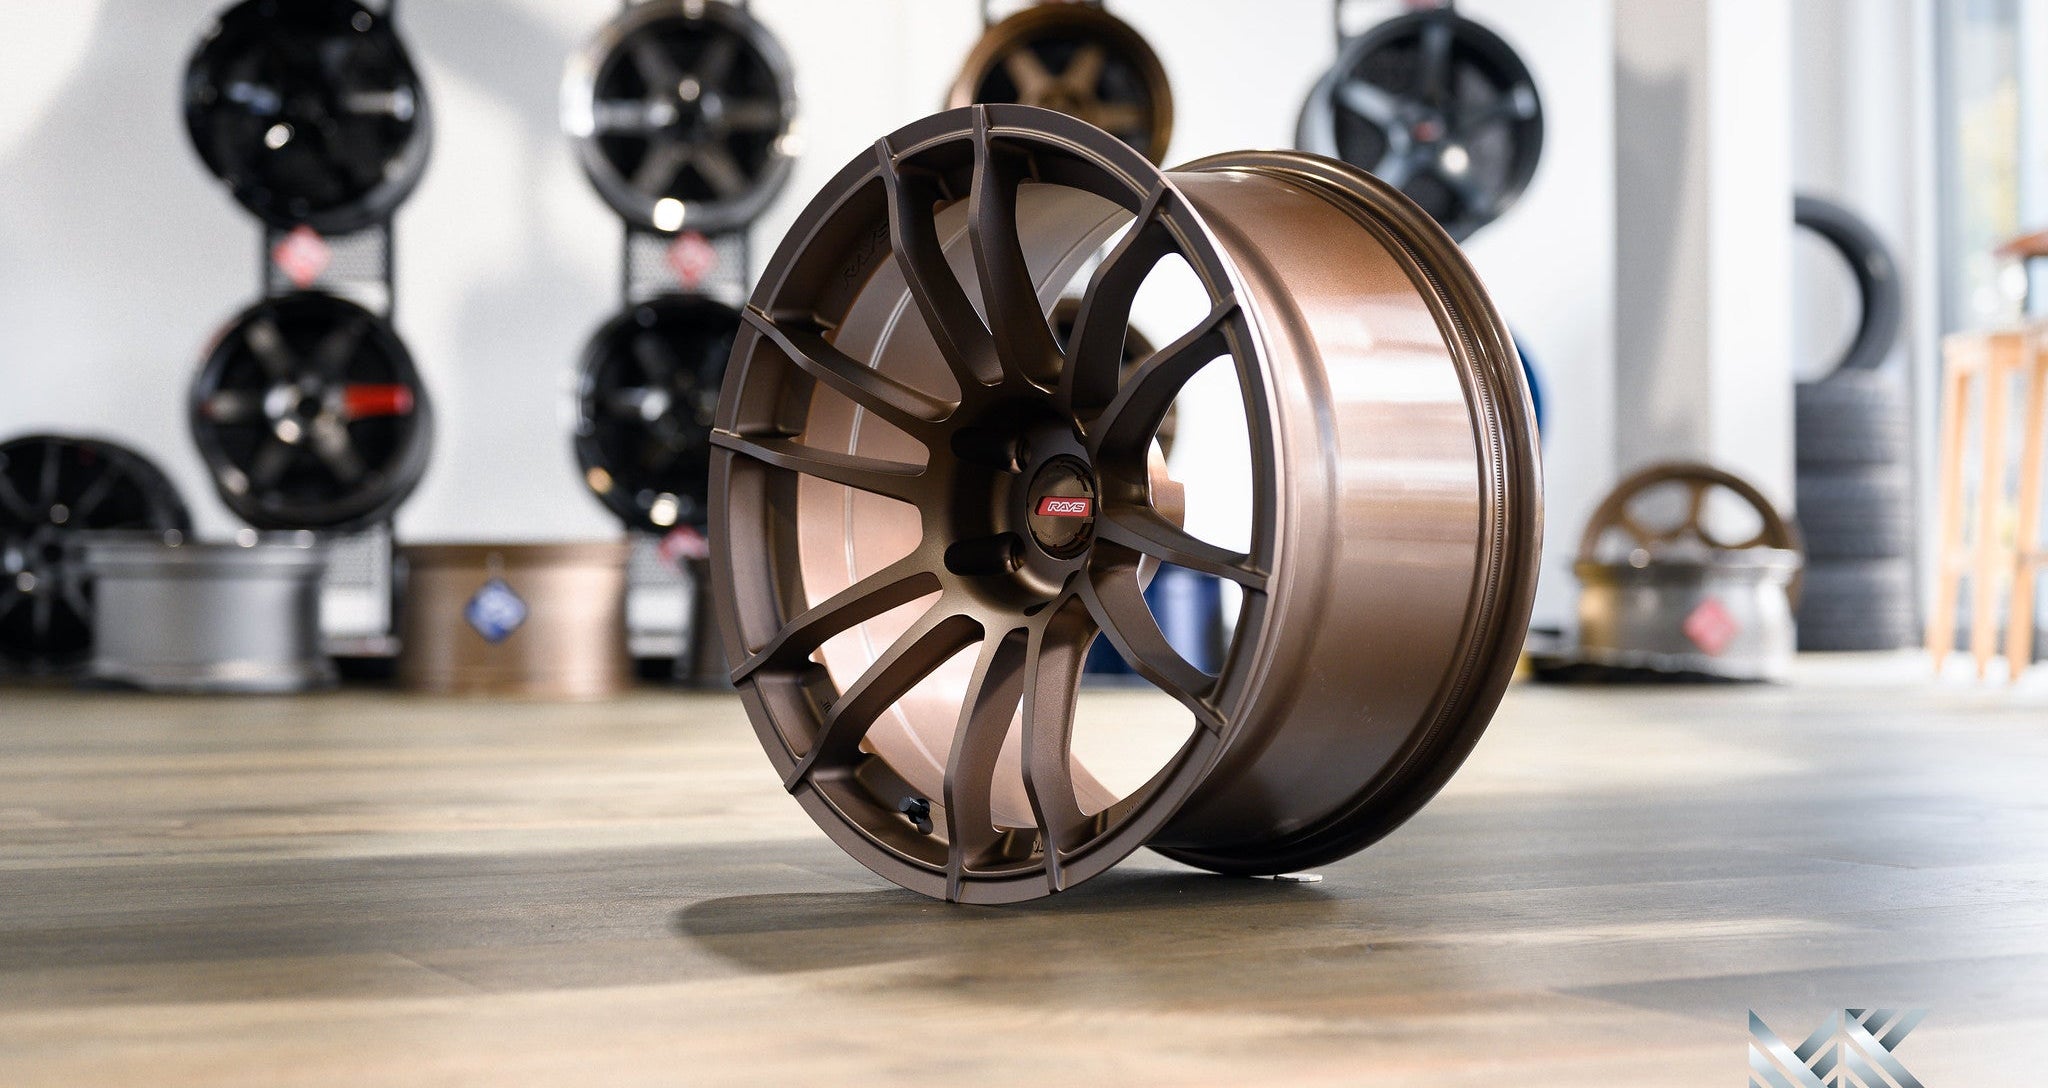 gramLIGHTS 57XR - Premium Wheels from Gram Lights - From just $2350.00! Shop now at MK MOTORSPORTS